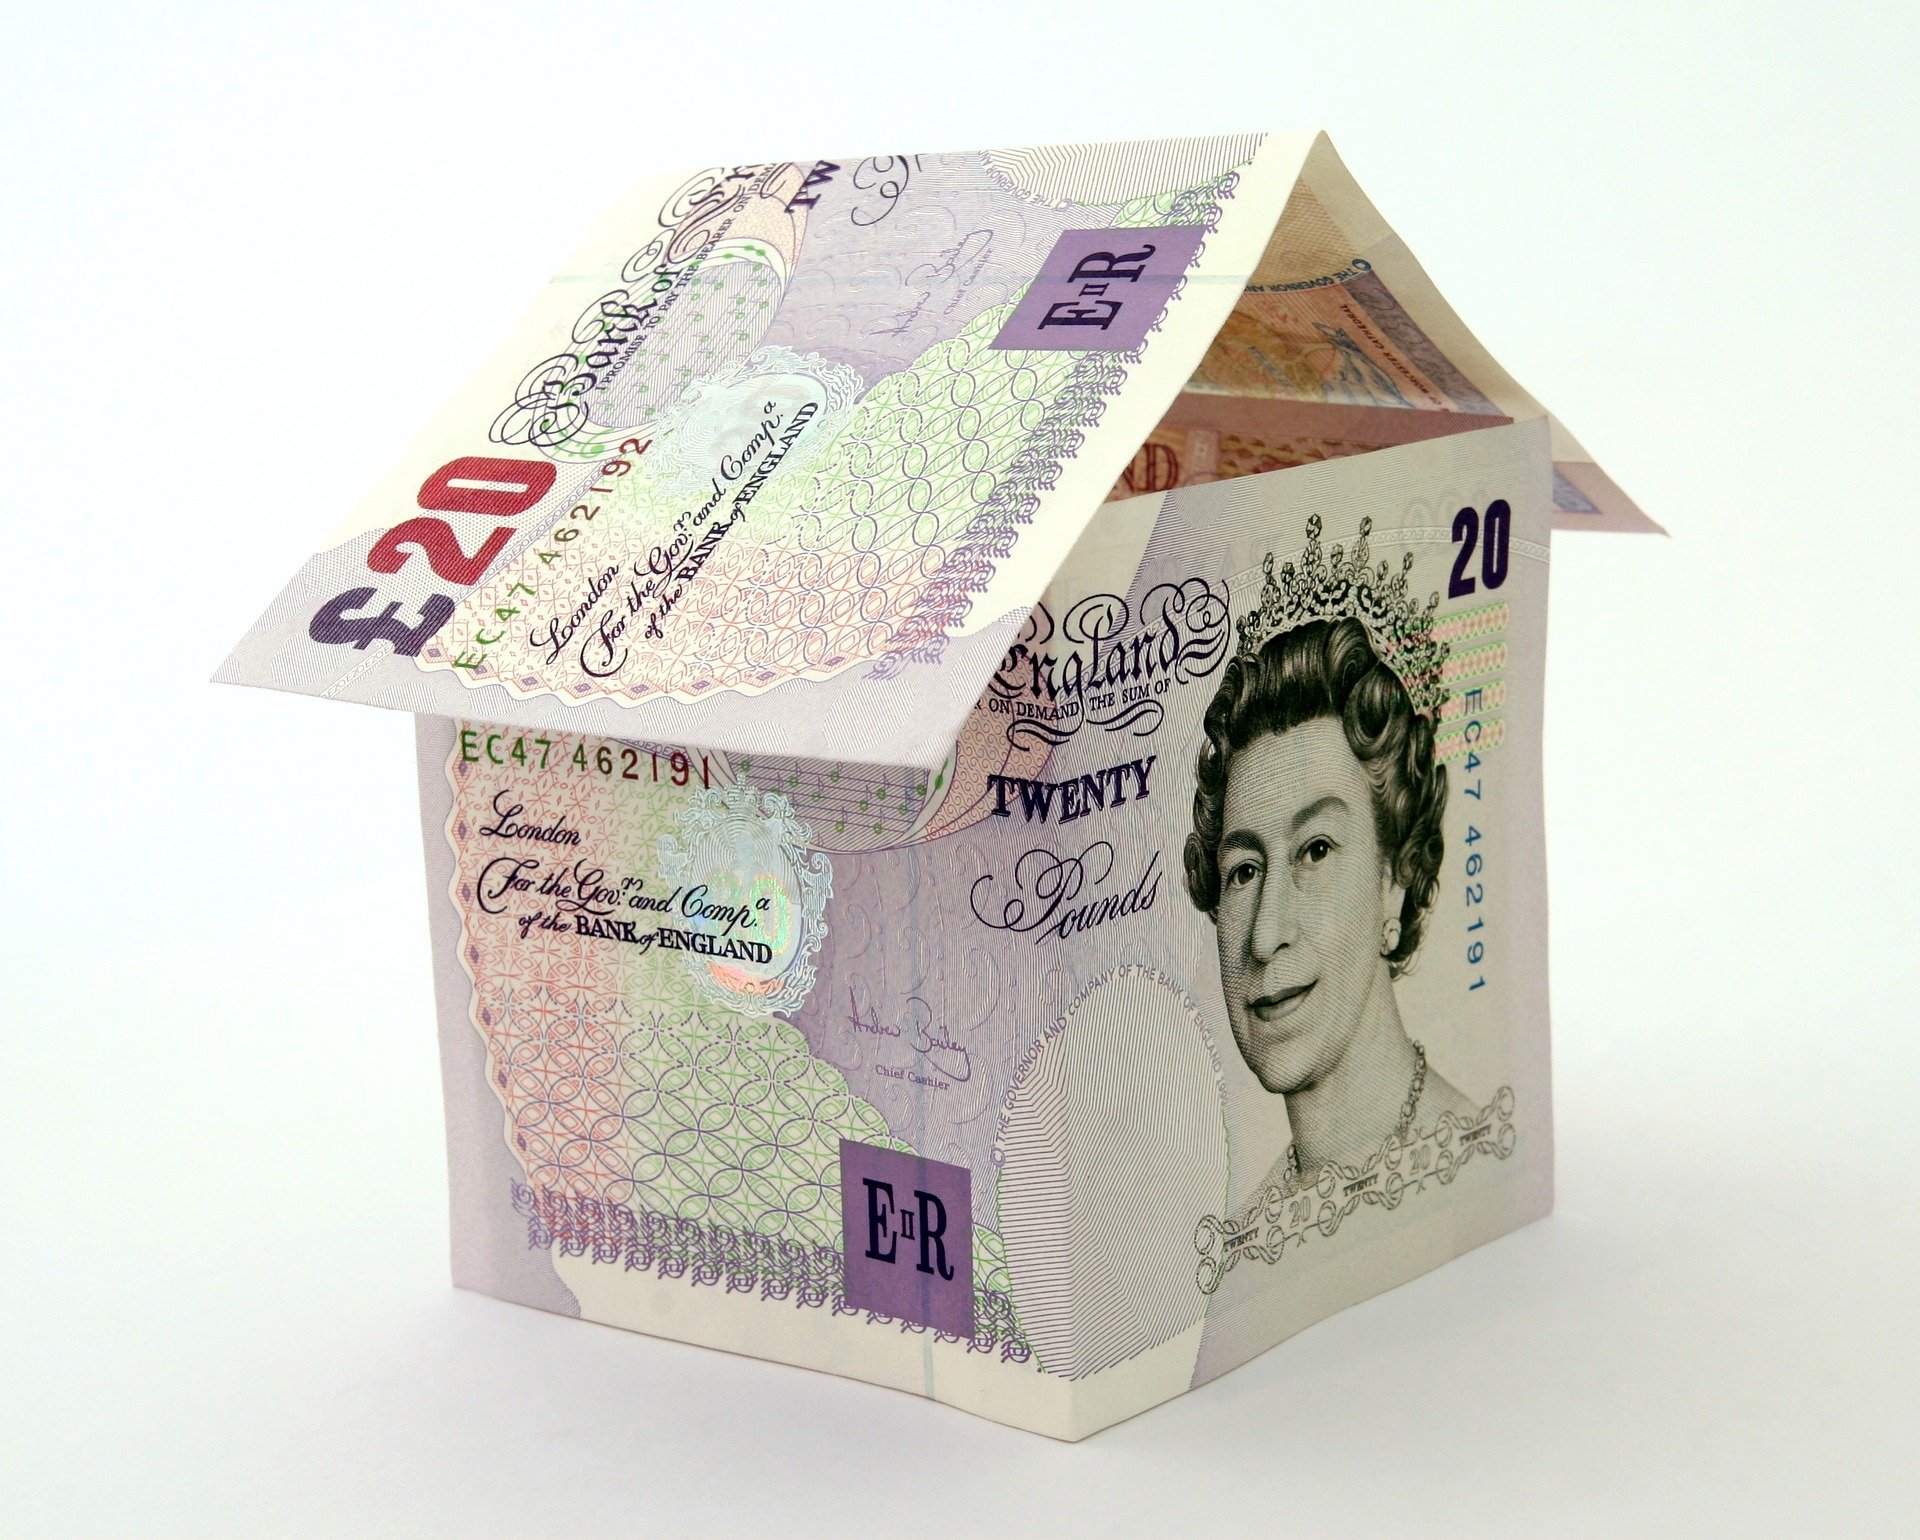 Selling a property post death- is there a capital gains tax charge?